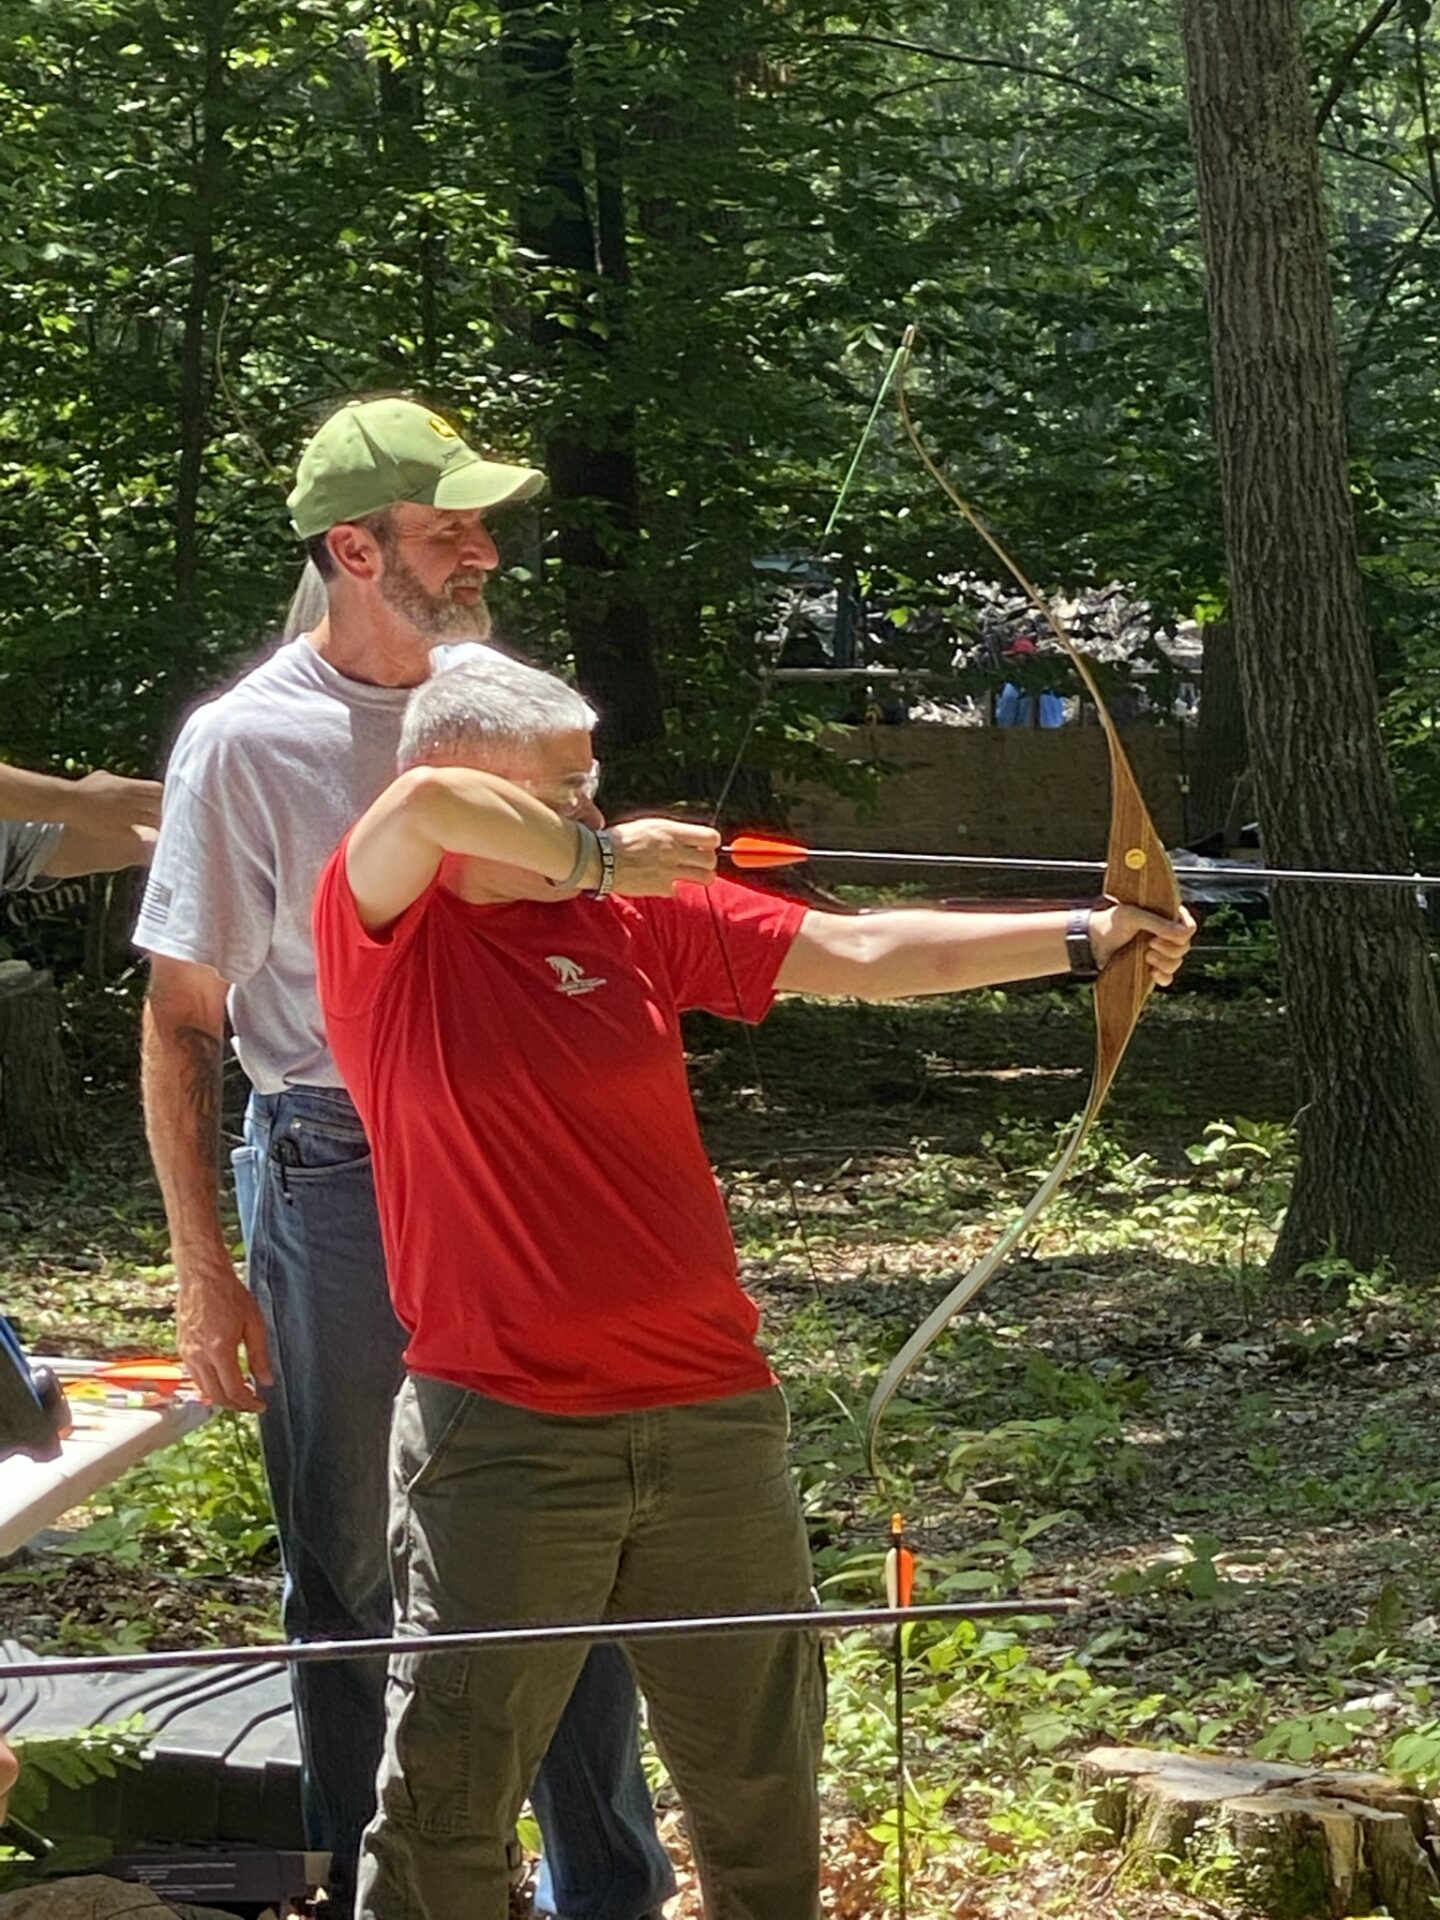 A Man in Red Color Shirt With a Bow and Arrow